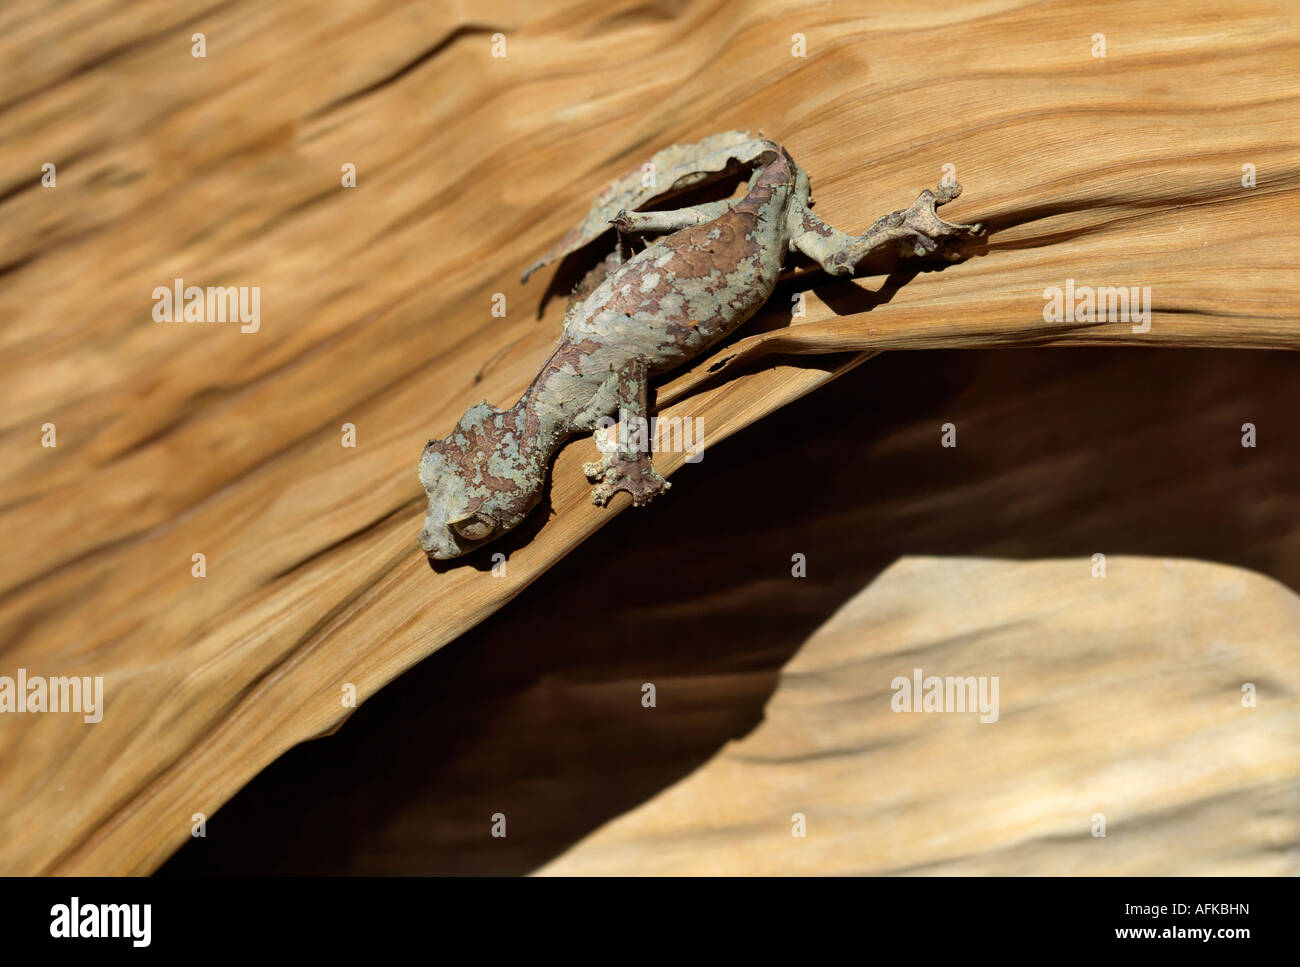 One of the most extraordinary geckoes in Madagascar is the Leaf-tailed or Fringed gecko (Uroplatus henkeli). Stock Photo